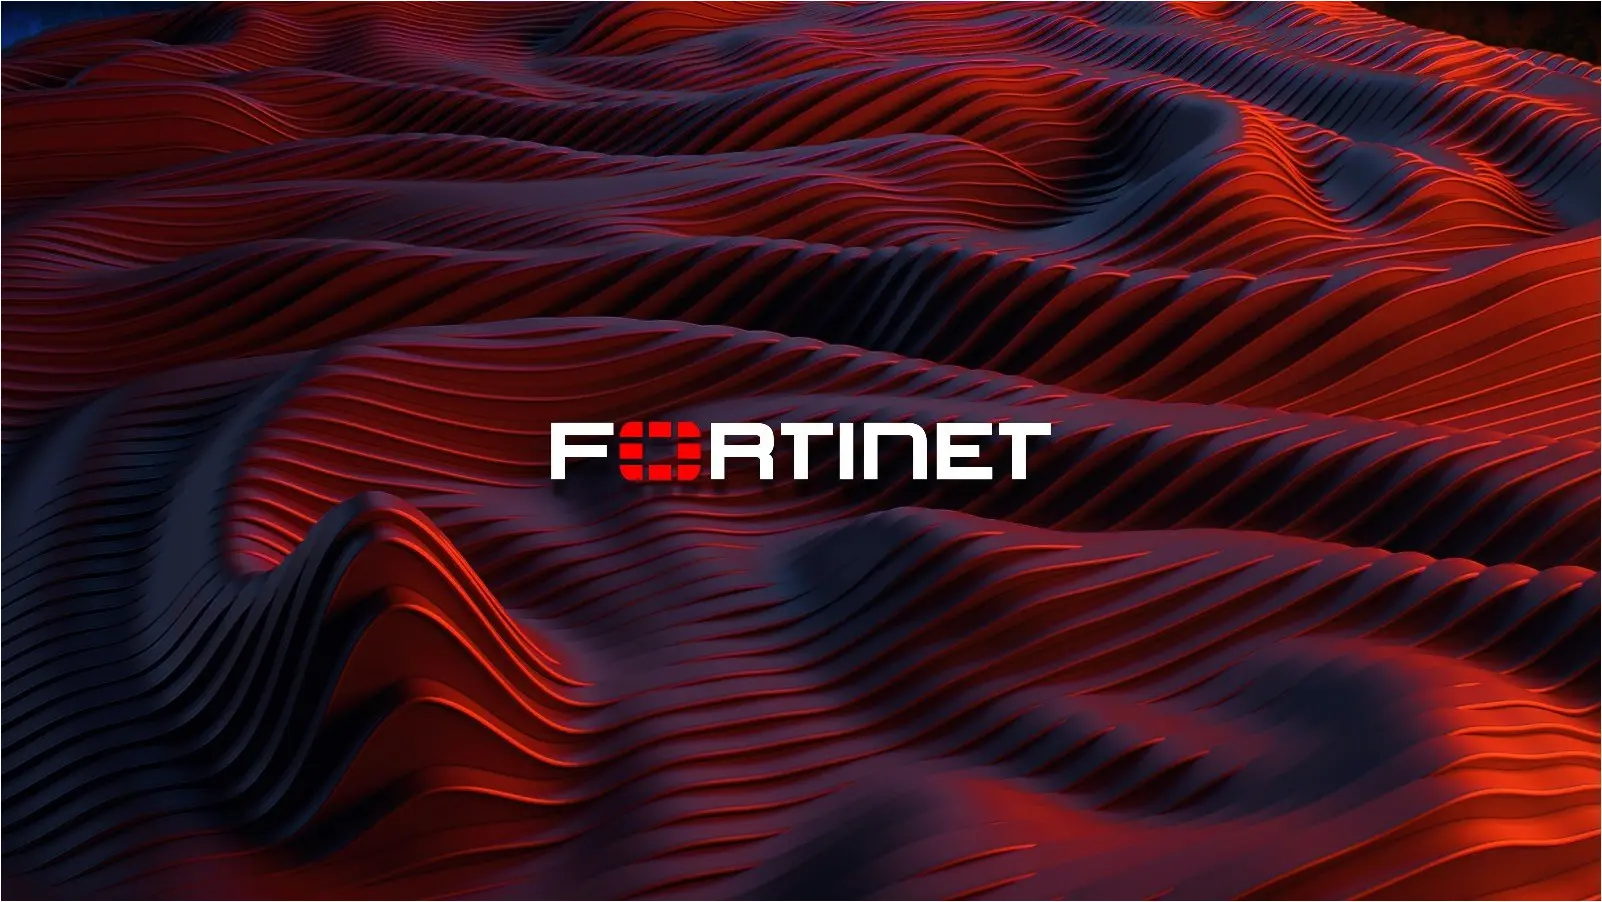 150,000 Fortinet devices potentially vulnerable to critical remote code execution